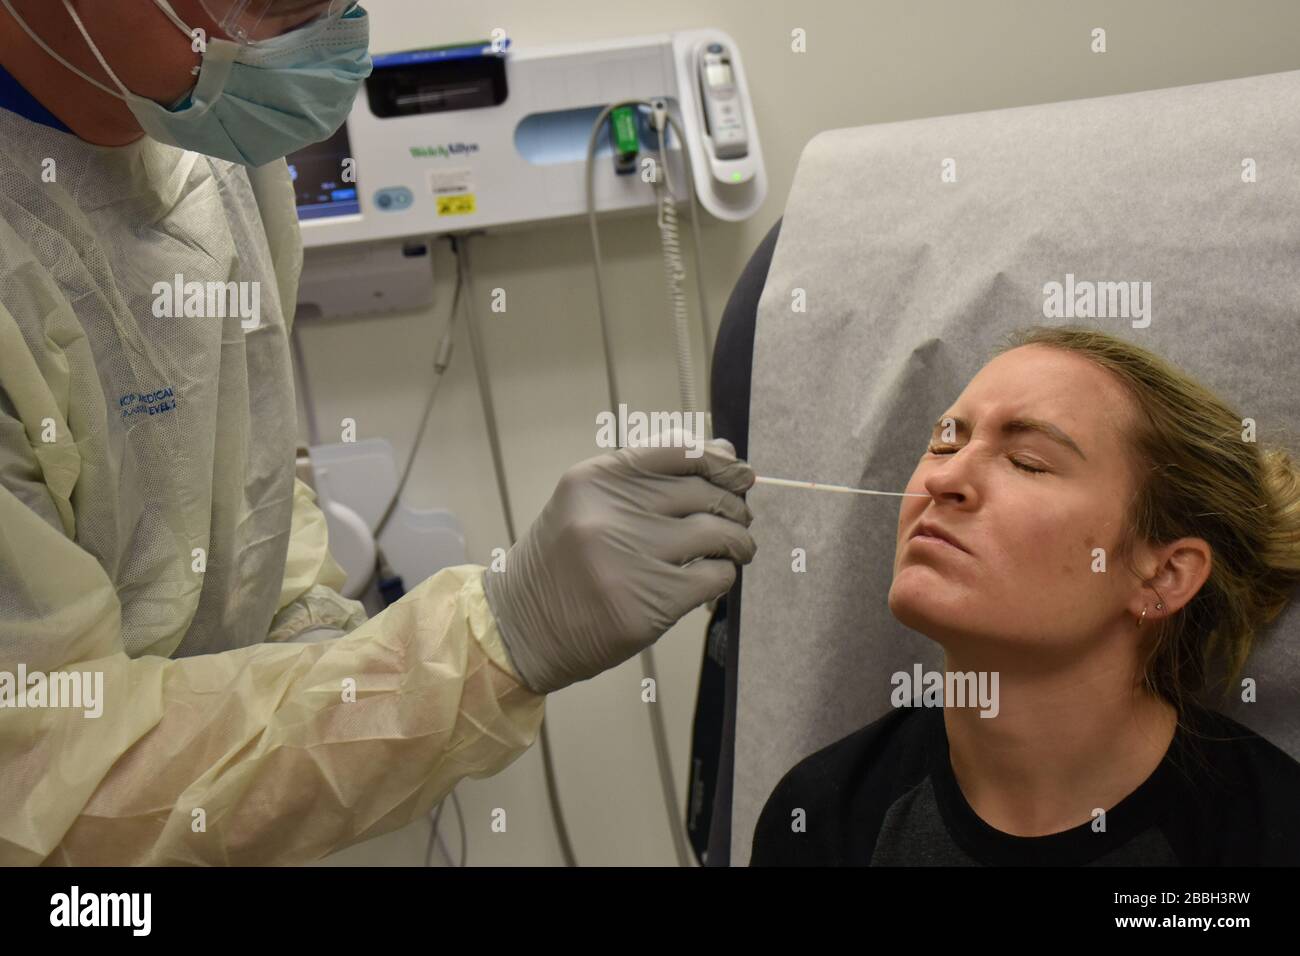 Fort Bragg, United States. 31st Mar, 2020. Pfc. Casey Tebo, a medic at the Womack Army Medical Center Urgent Care Clinic at Fort Bragg, North Carolina, performs a COVID-19 test on a patient on March 26, 2020. Photo by Twana Atkinson/U.S. Army/UPI Credit: UPI/Alamy Live News Stock Photo